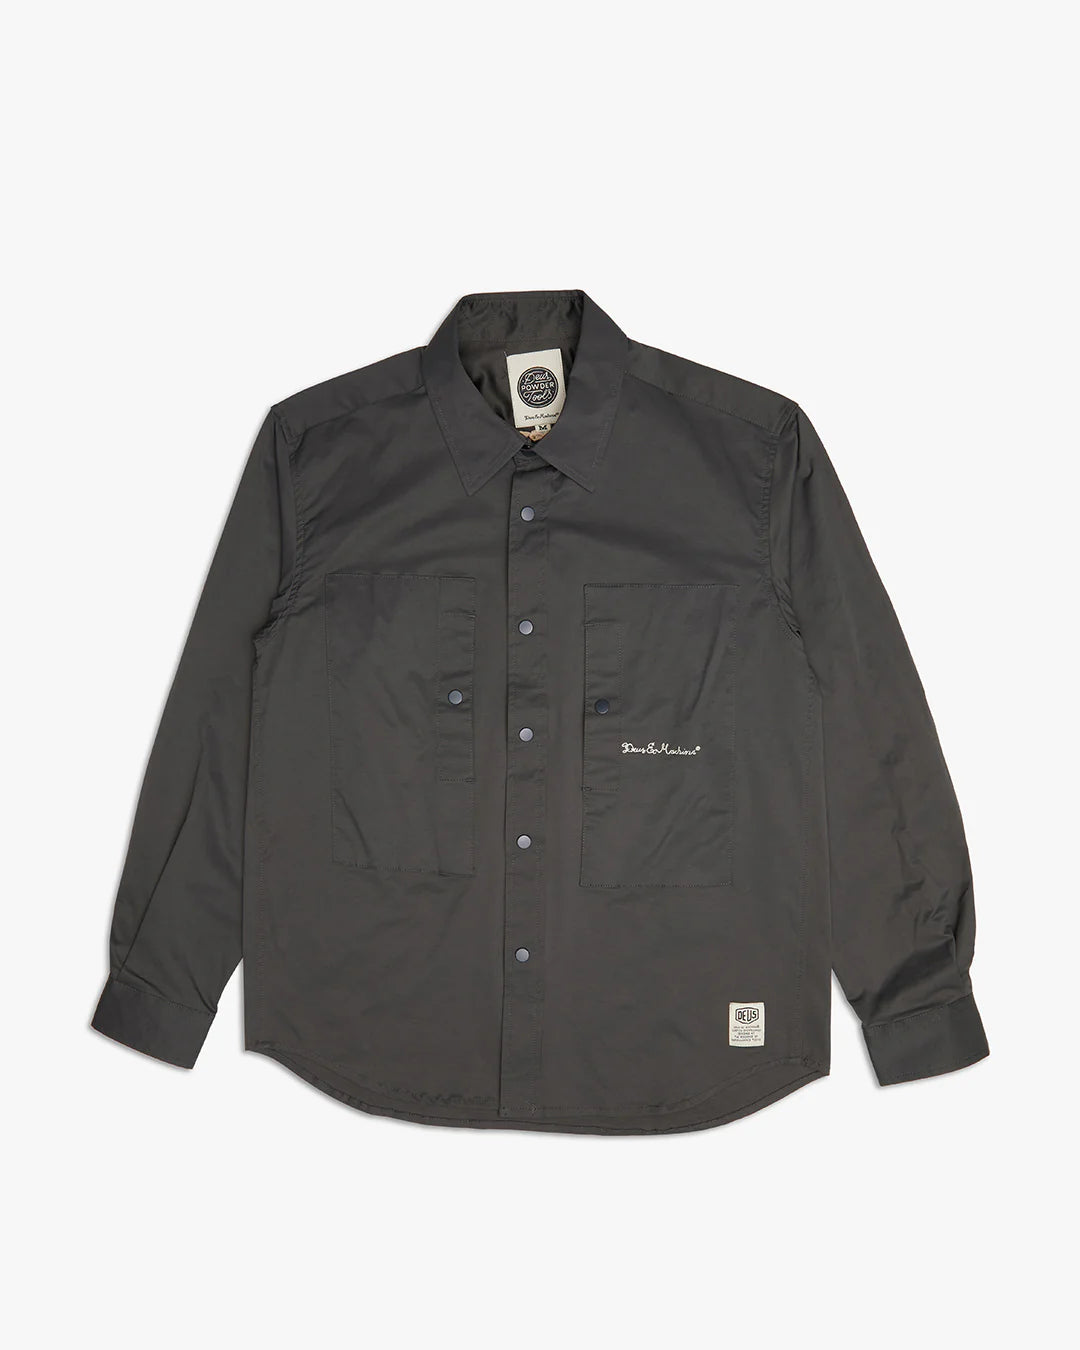 MENS SHIRTS – Curated Goods Ltd